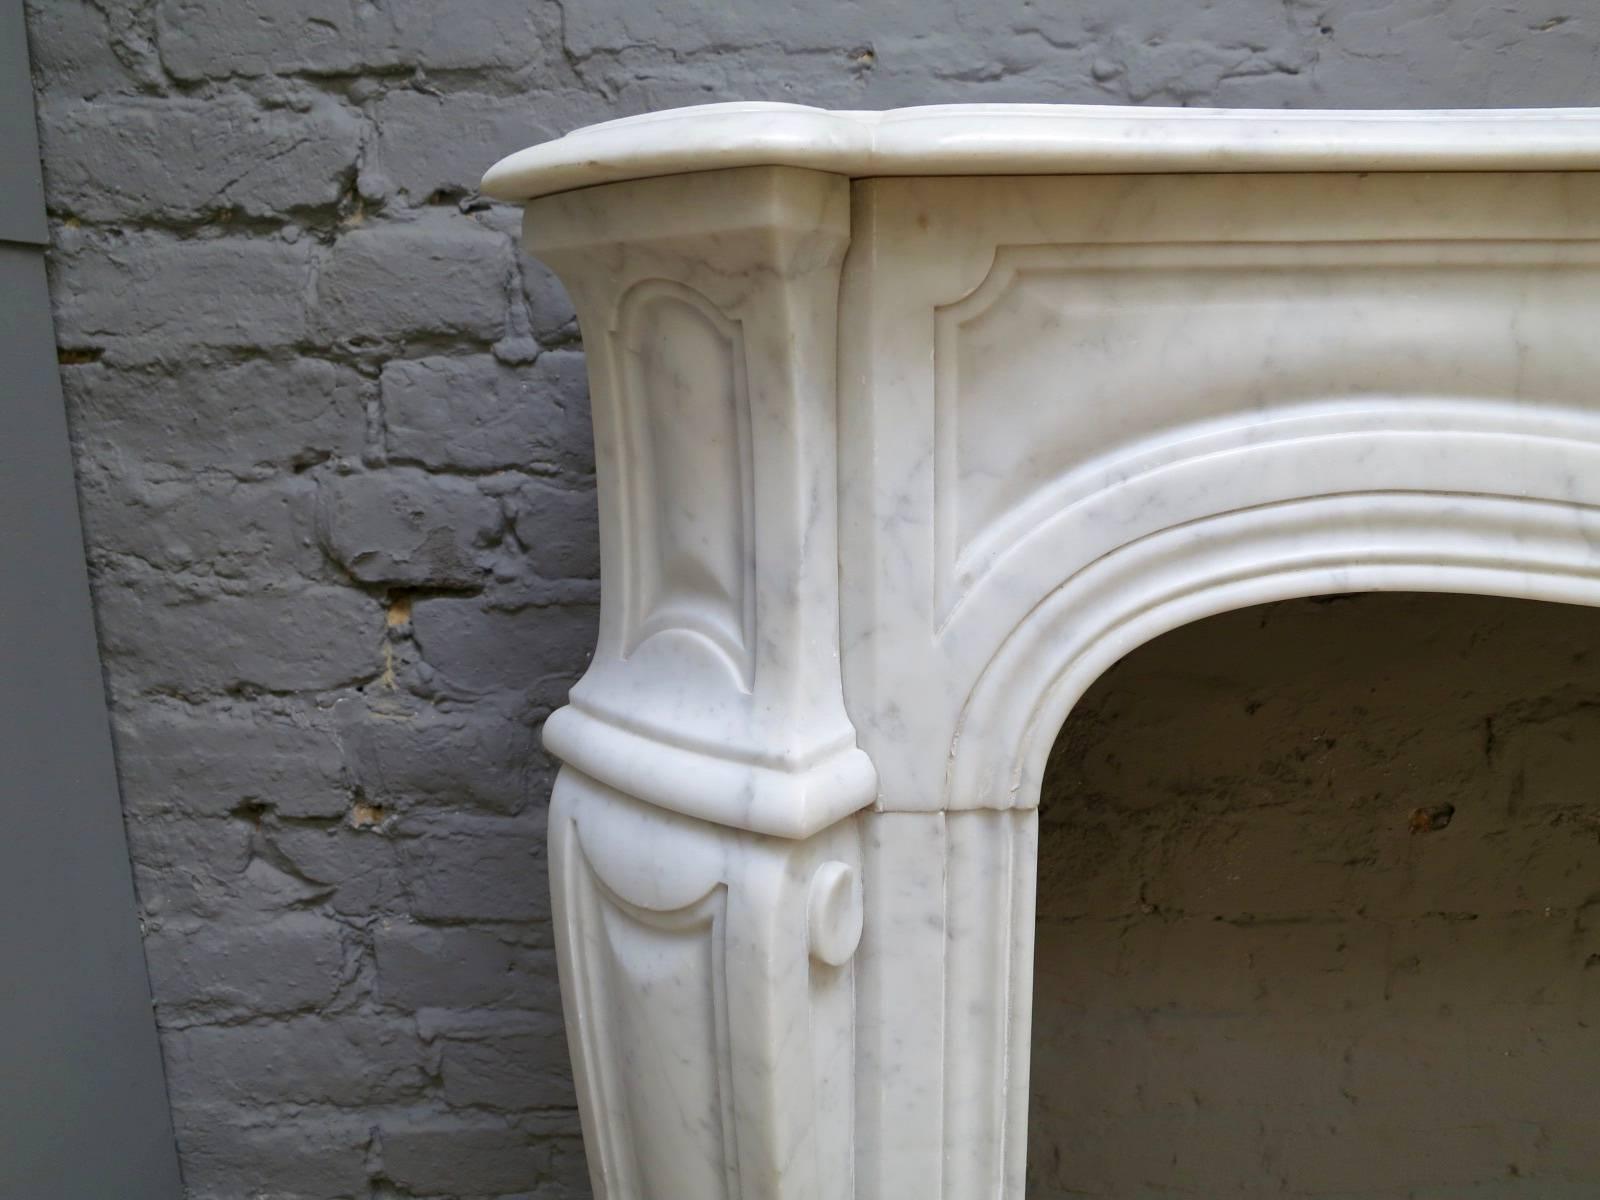 A 19th century French Pompadour fireplace in the Louis XV style, in pale Carrara marble, with canted panelled jambs, conforming panelled frieze and serpentine shelf. The side returns with square brass vents.
Opening size 93 cm W x 85 cm H.